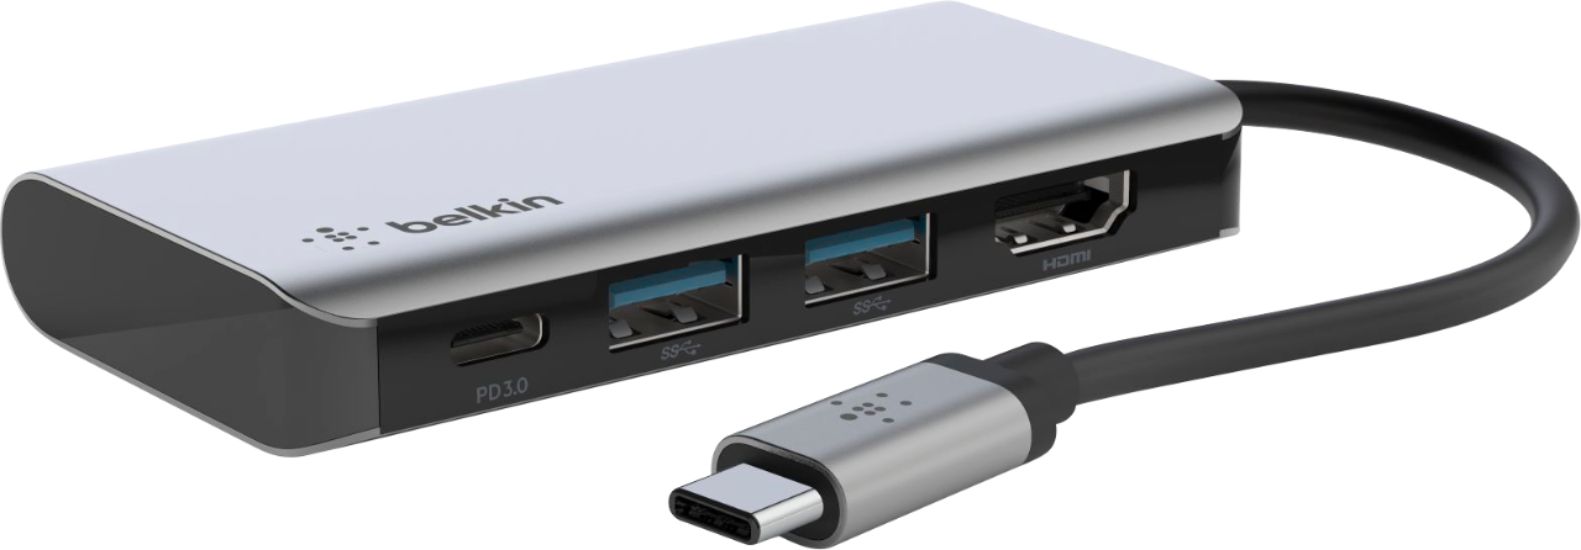 USB C Multiport Adapter - 4K HDMI/PD/USB - USB-C Multiport Adapters, Universal Laptop Docking Stations